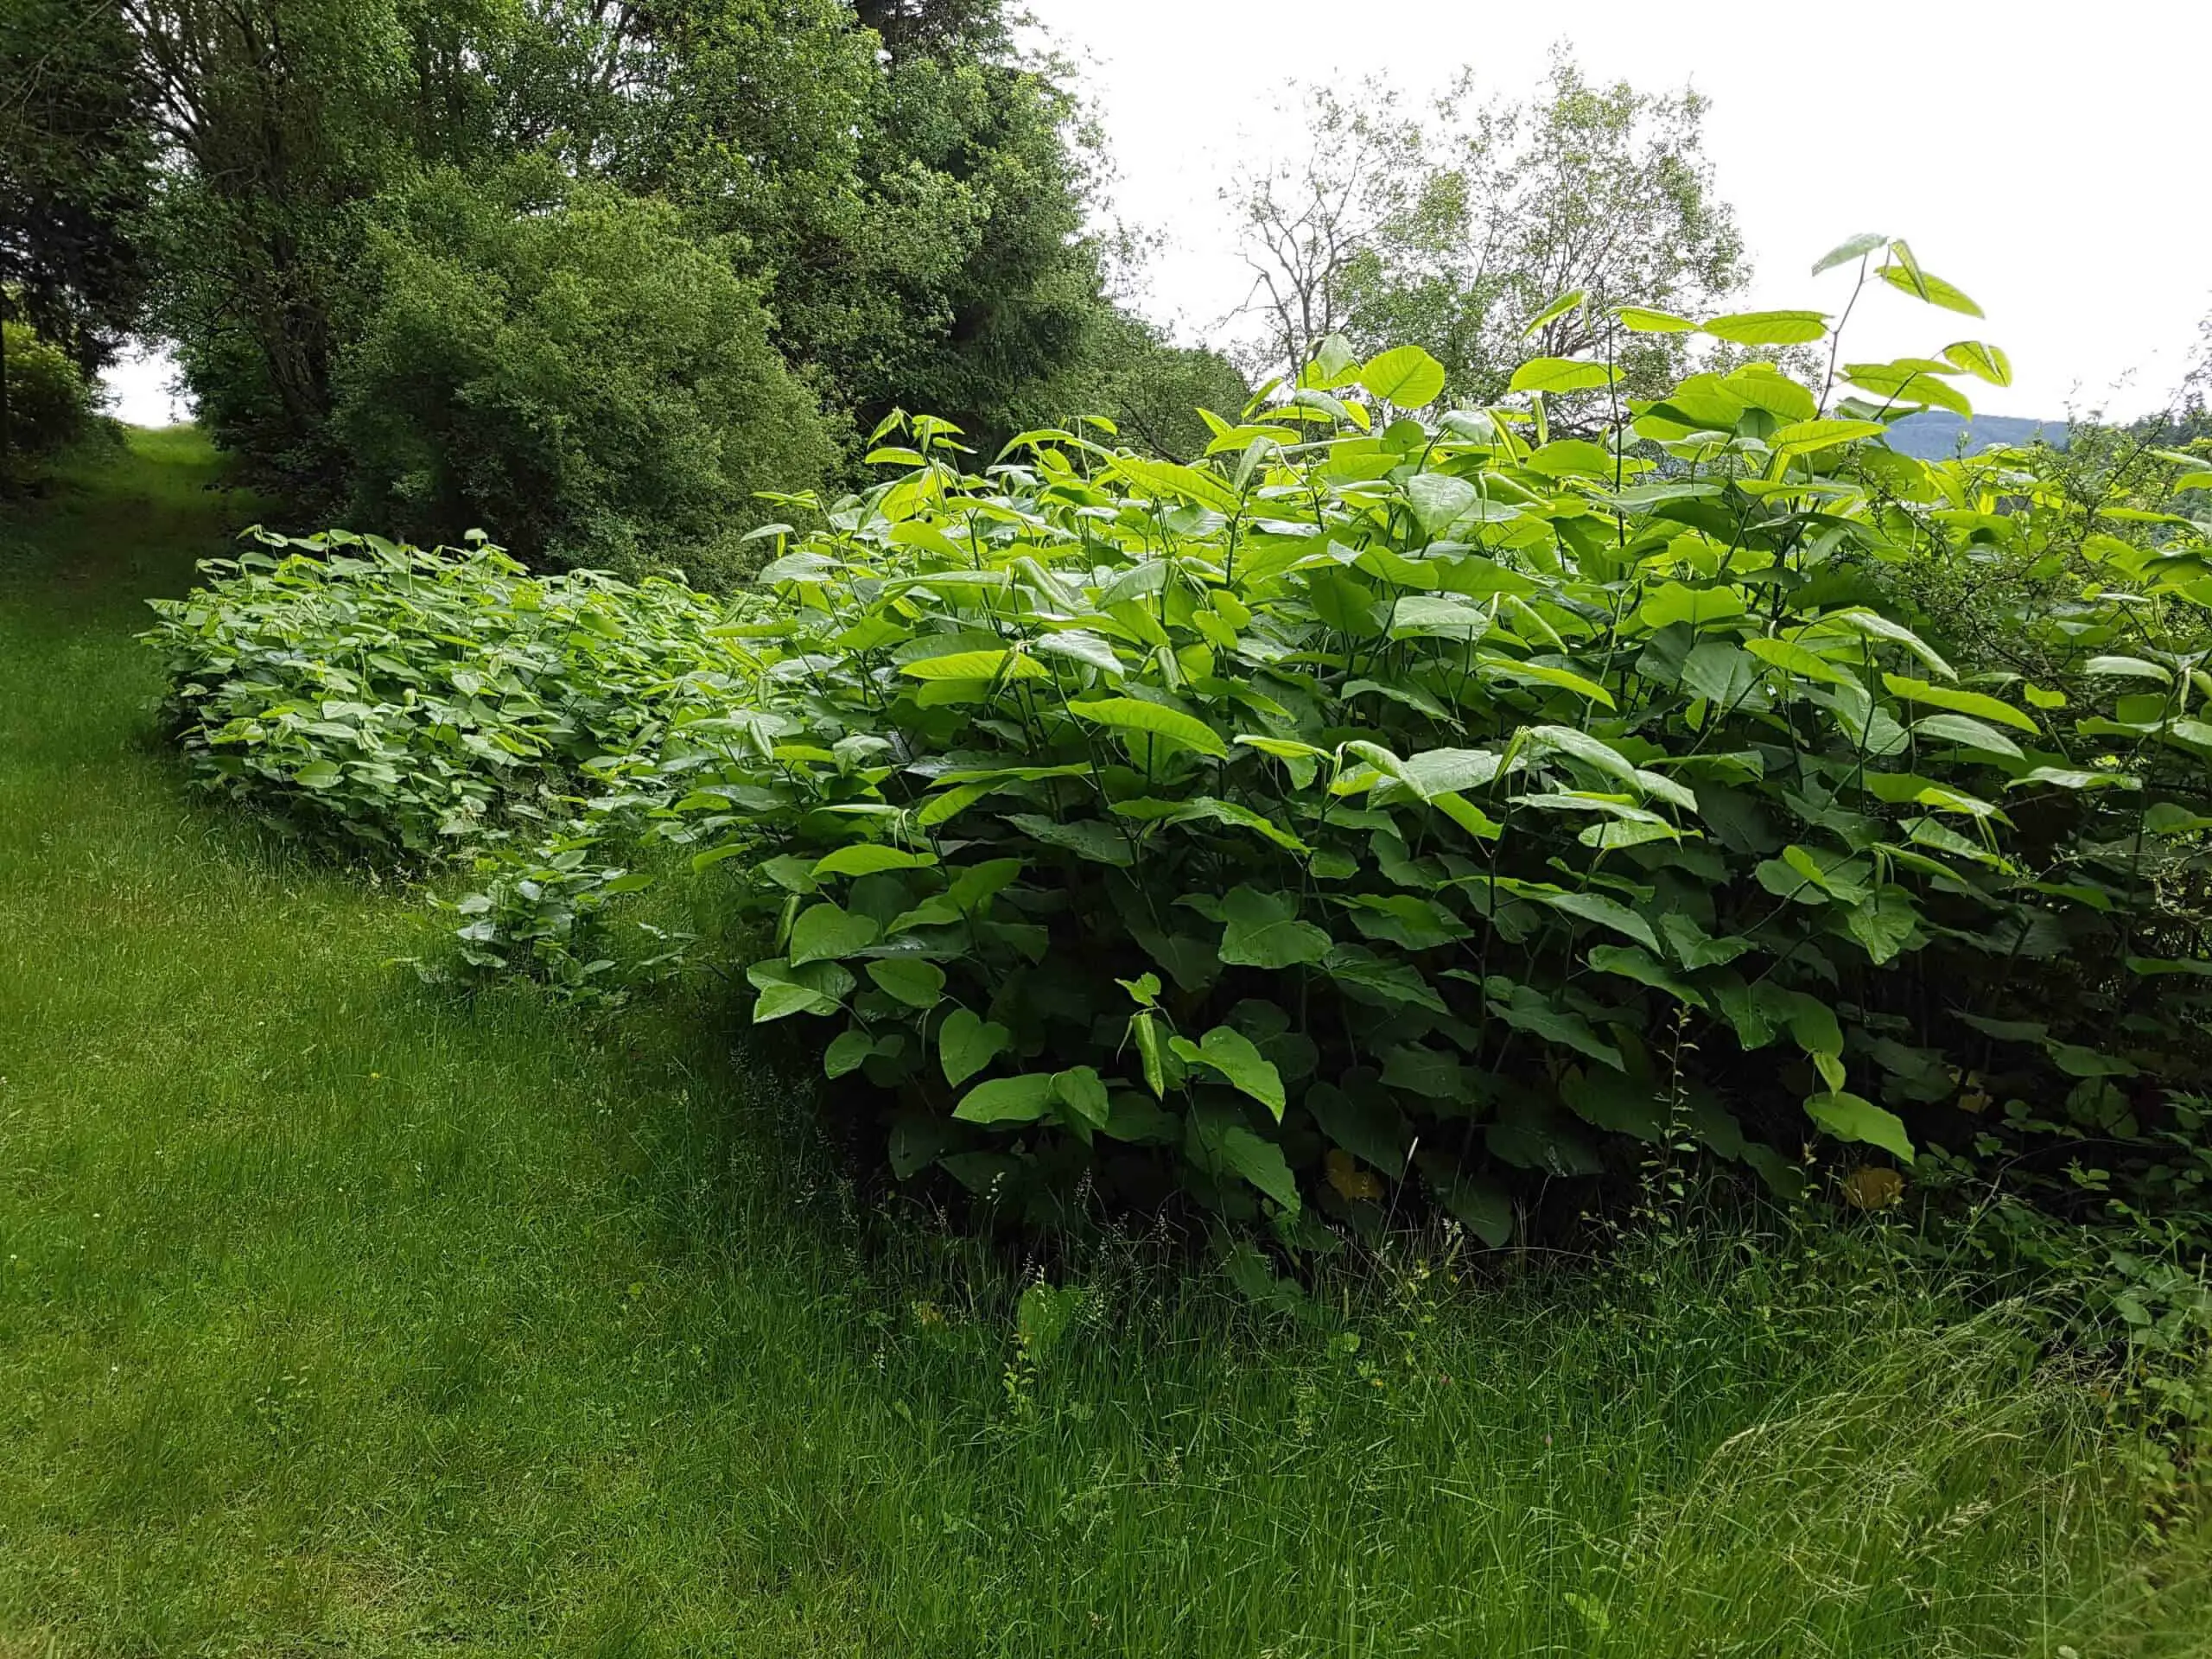 If the neighbour has Japanese knotweed on the property, they have a legal obligation to stop it from spreading to yours